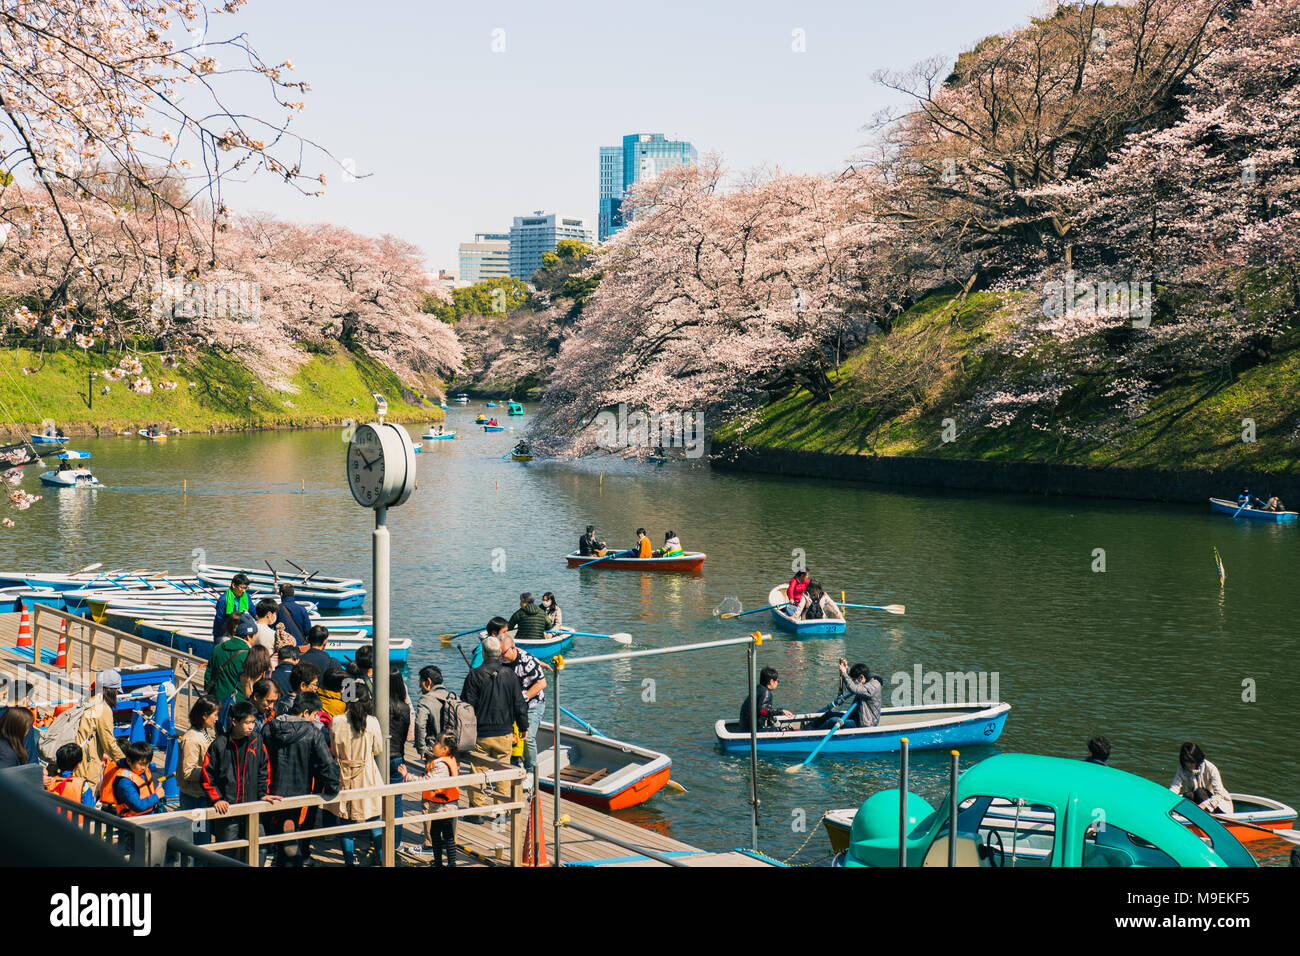 People gather to get on boats to row on the moat around the Imperial Palace in Tokyo, Japan to view the cherry blossoms as they near full bloom Stock Photo